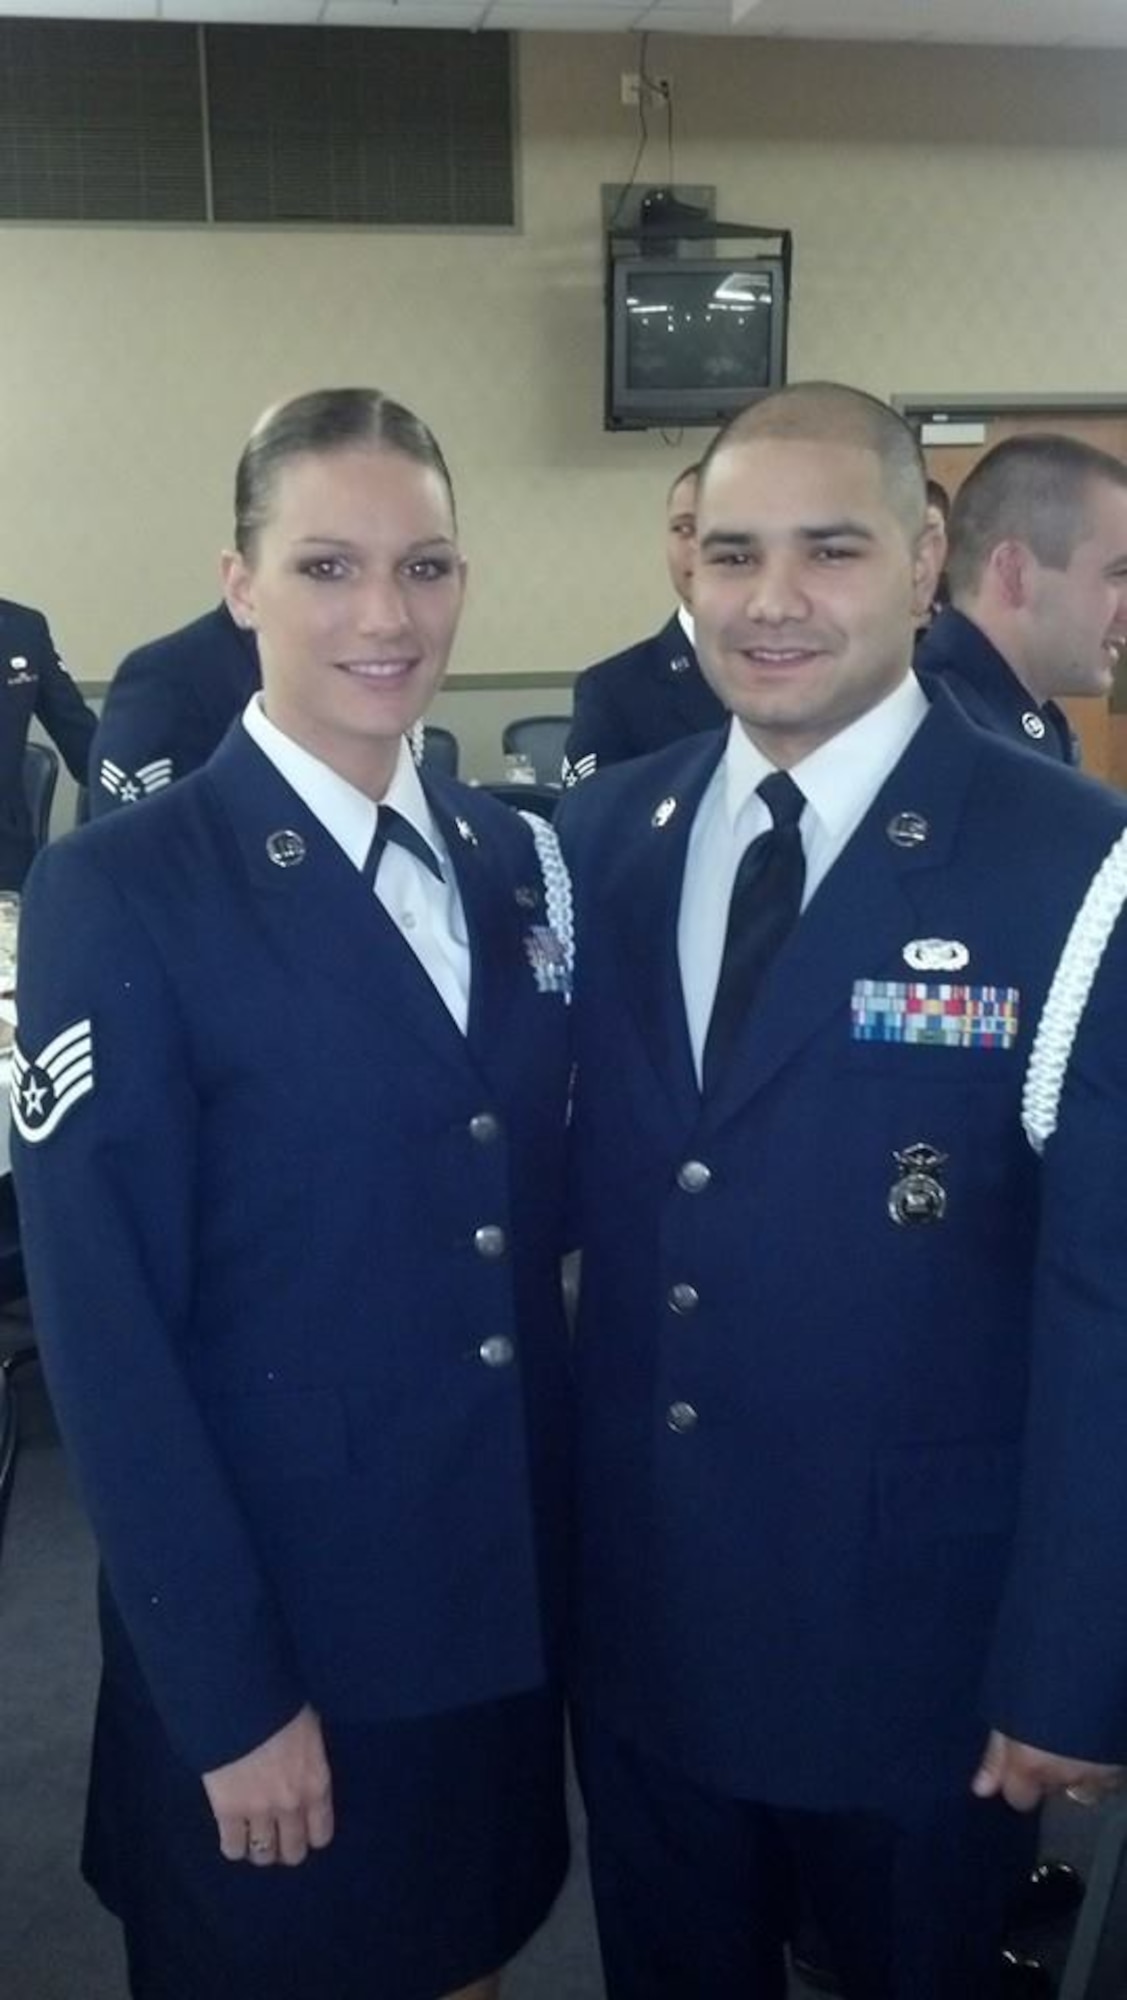 Staff Sgt. Montoya is an Area Defense Counsel paralegal assigned to the 8th Fighter Wing.